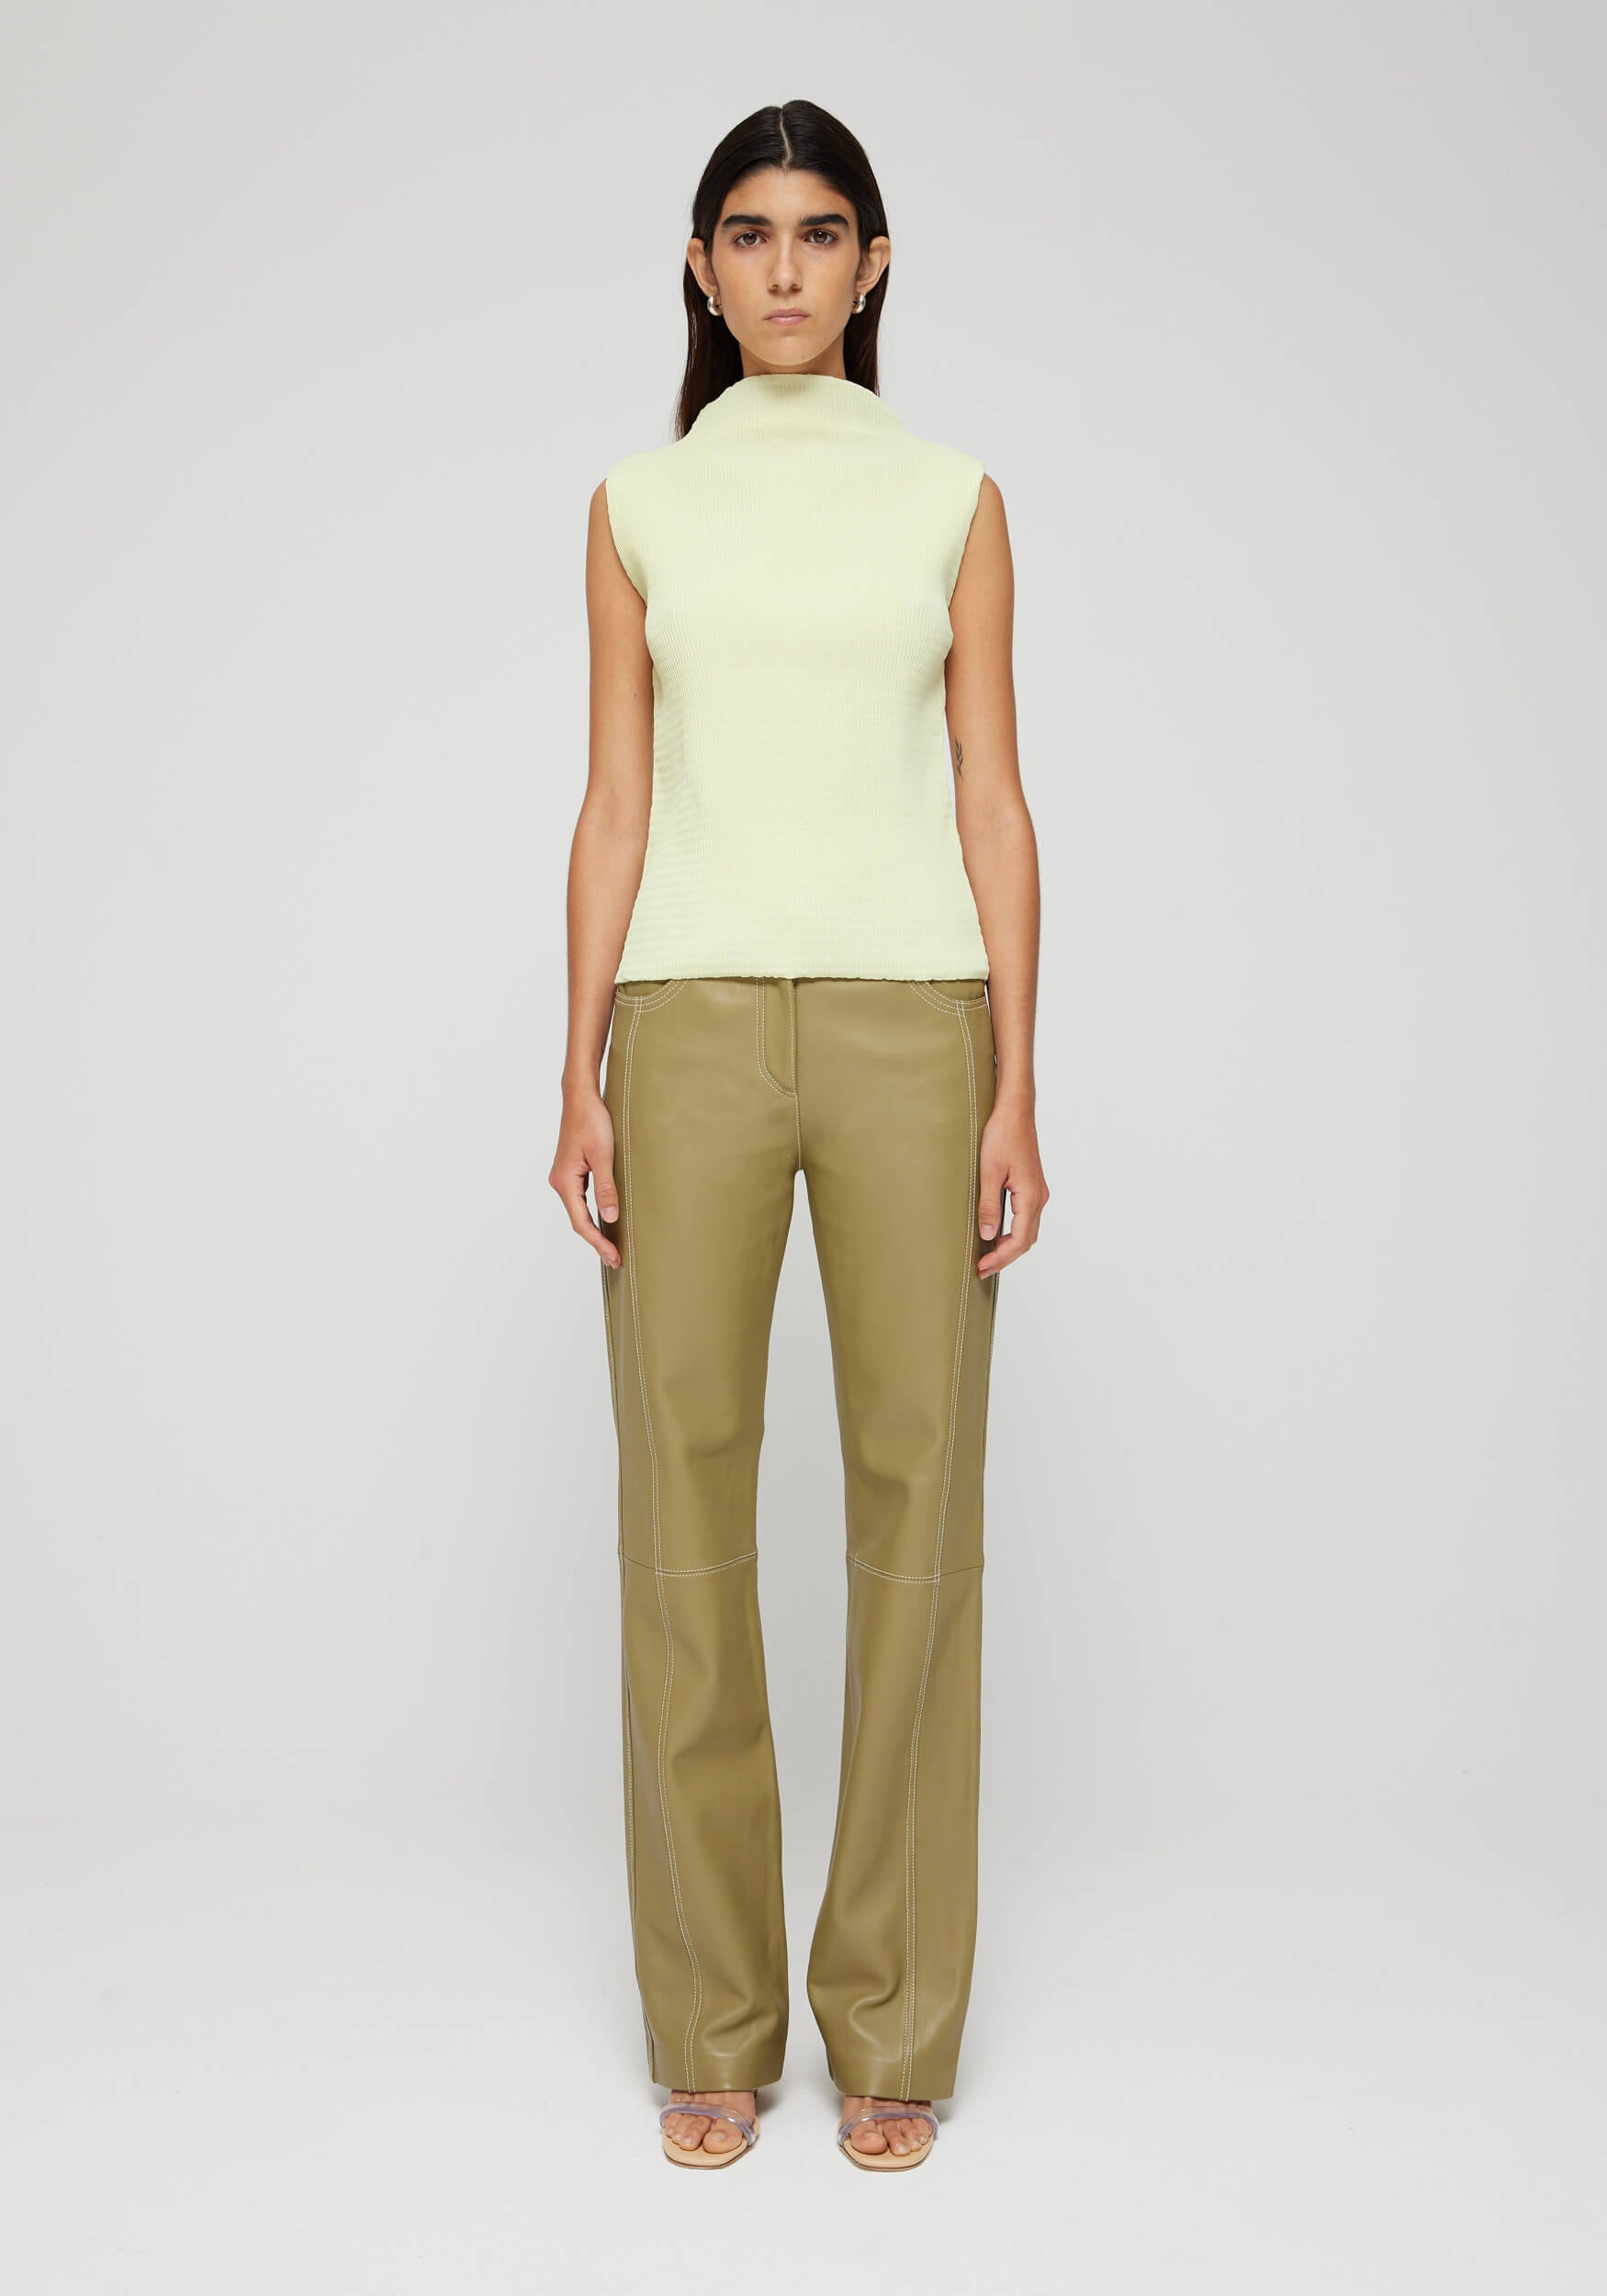 Rohe Sleeveless Textured Top in Light Yellow available at TNT The New Trend Australia. Free shipping on orders over $300 AUD.